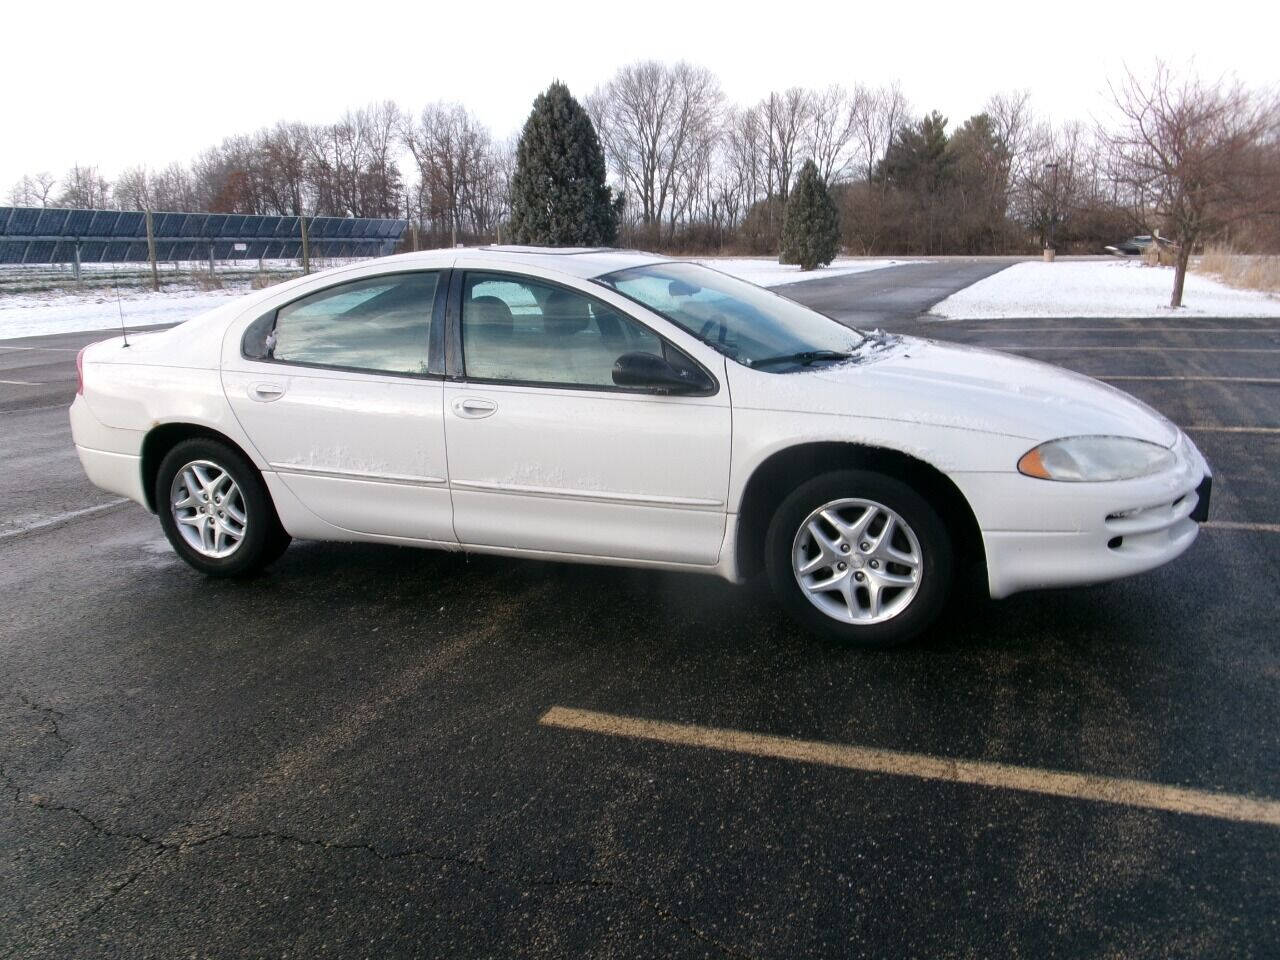 Used Dodge Intrepid for Sale in Blue Springs, MO